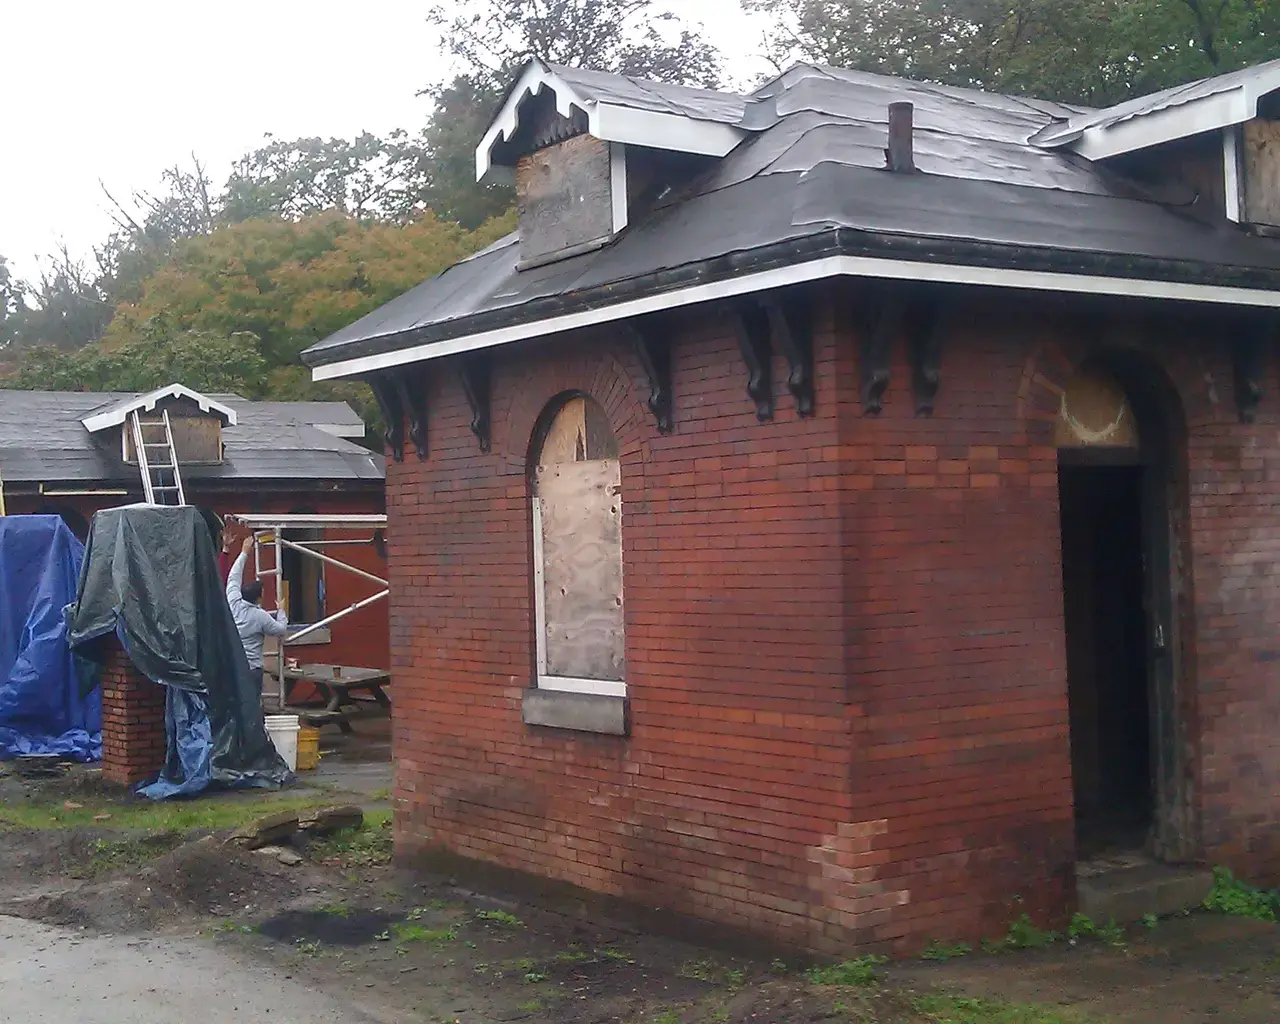 Restoration of two of the last remaining structures from Philadelphia&rsquo;s 1876 Centennial Exposition in Fairmount Park. Image courtesy of Shofuso, The Friends of the Japanese House and Garden.